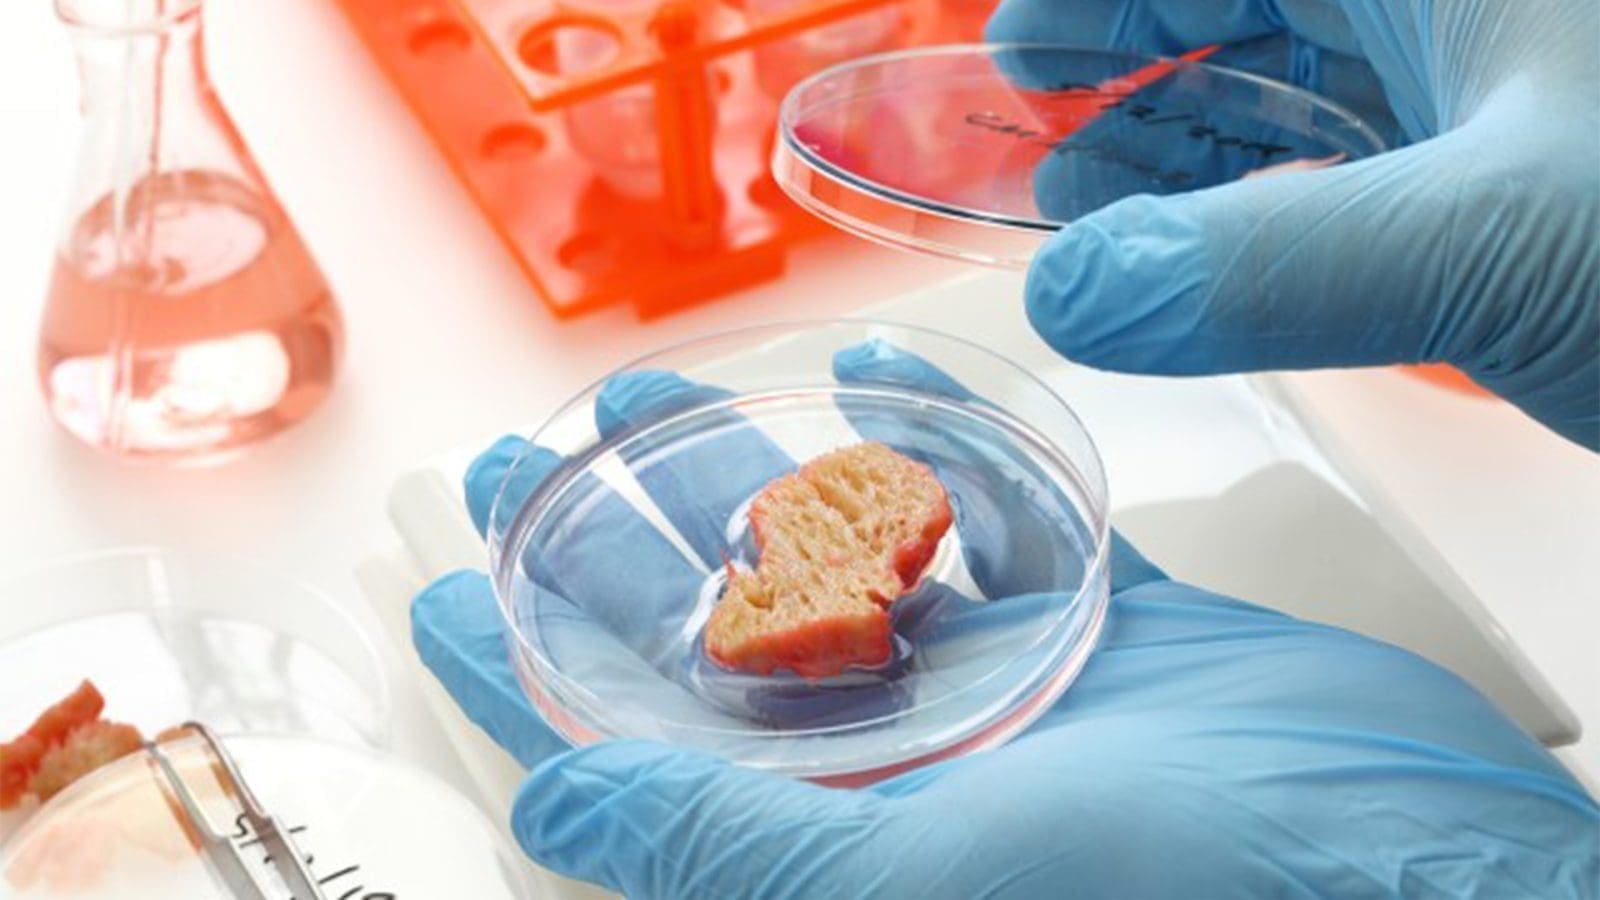 FAO, WHO publish comprehensive guide on food safety aspects of cell-based food